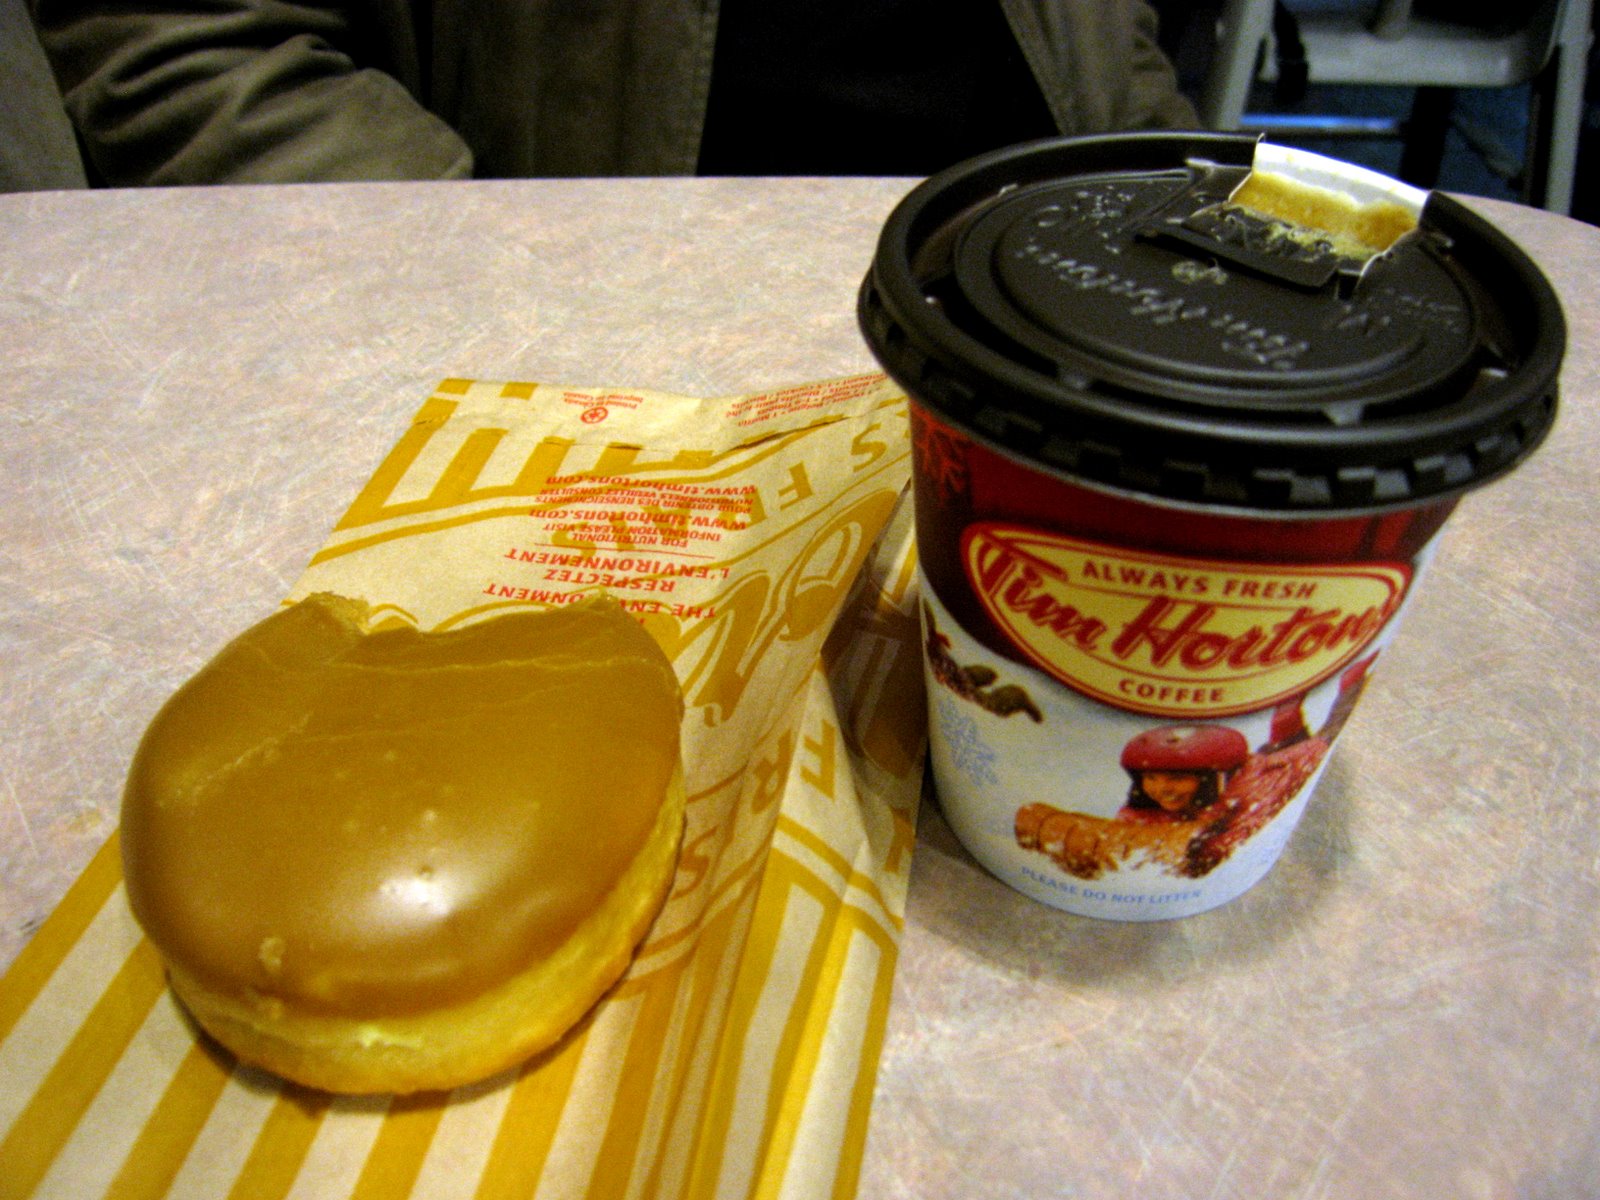 Tim Horton's Butter Caramel Hot Smoothie and Maple Donut